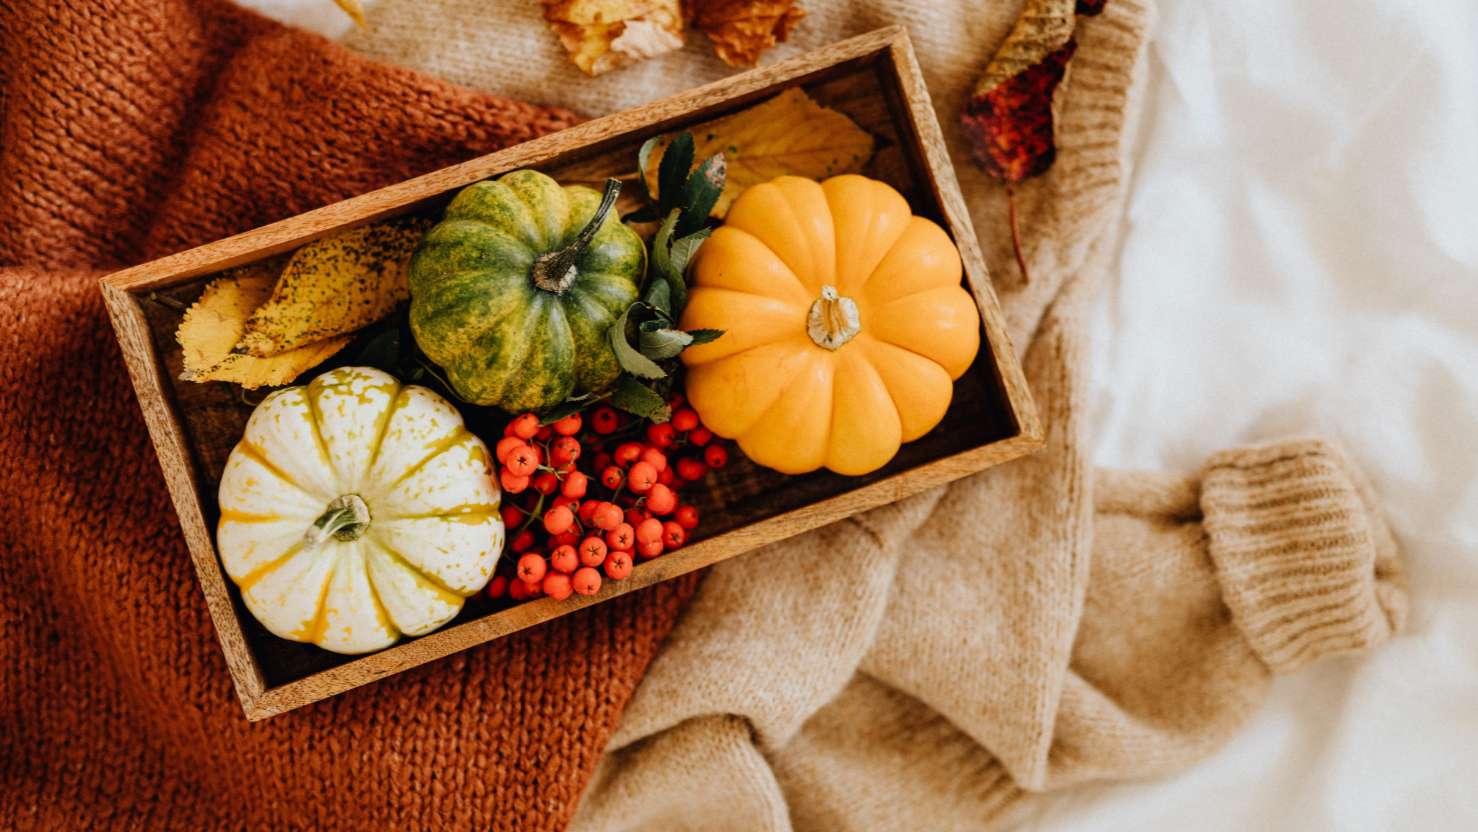 How To Decorate Your Home & Hallway In Autumn & Fall Season